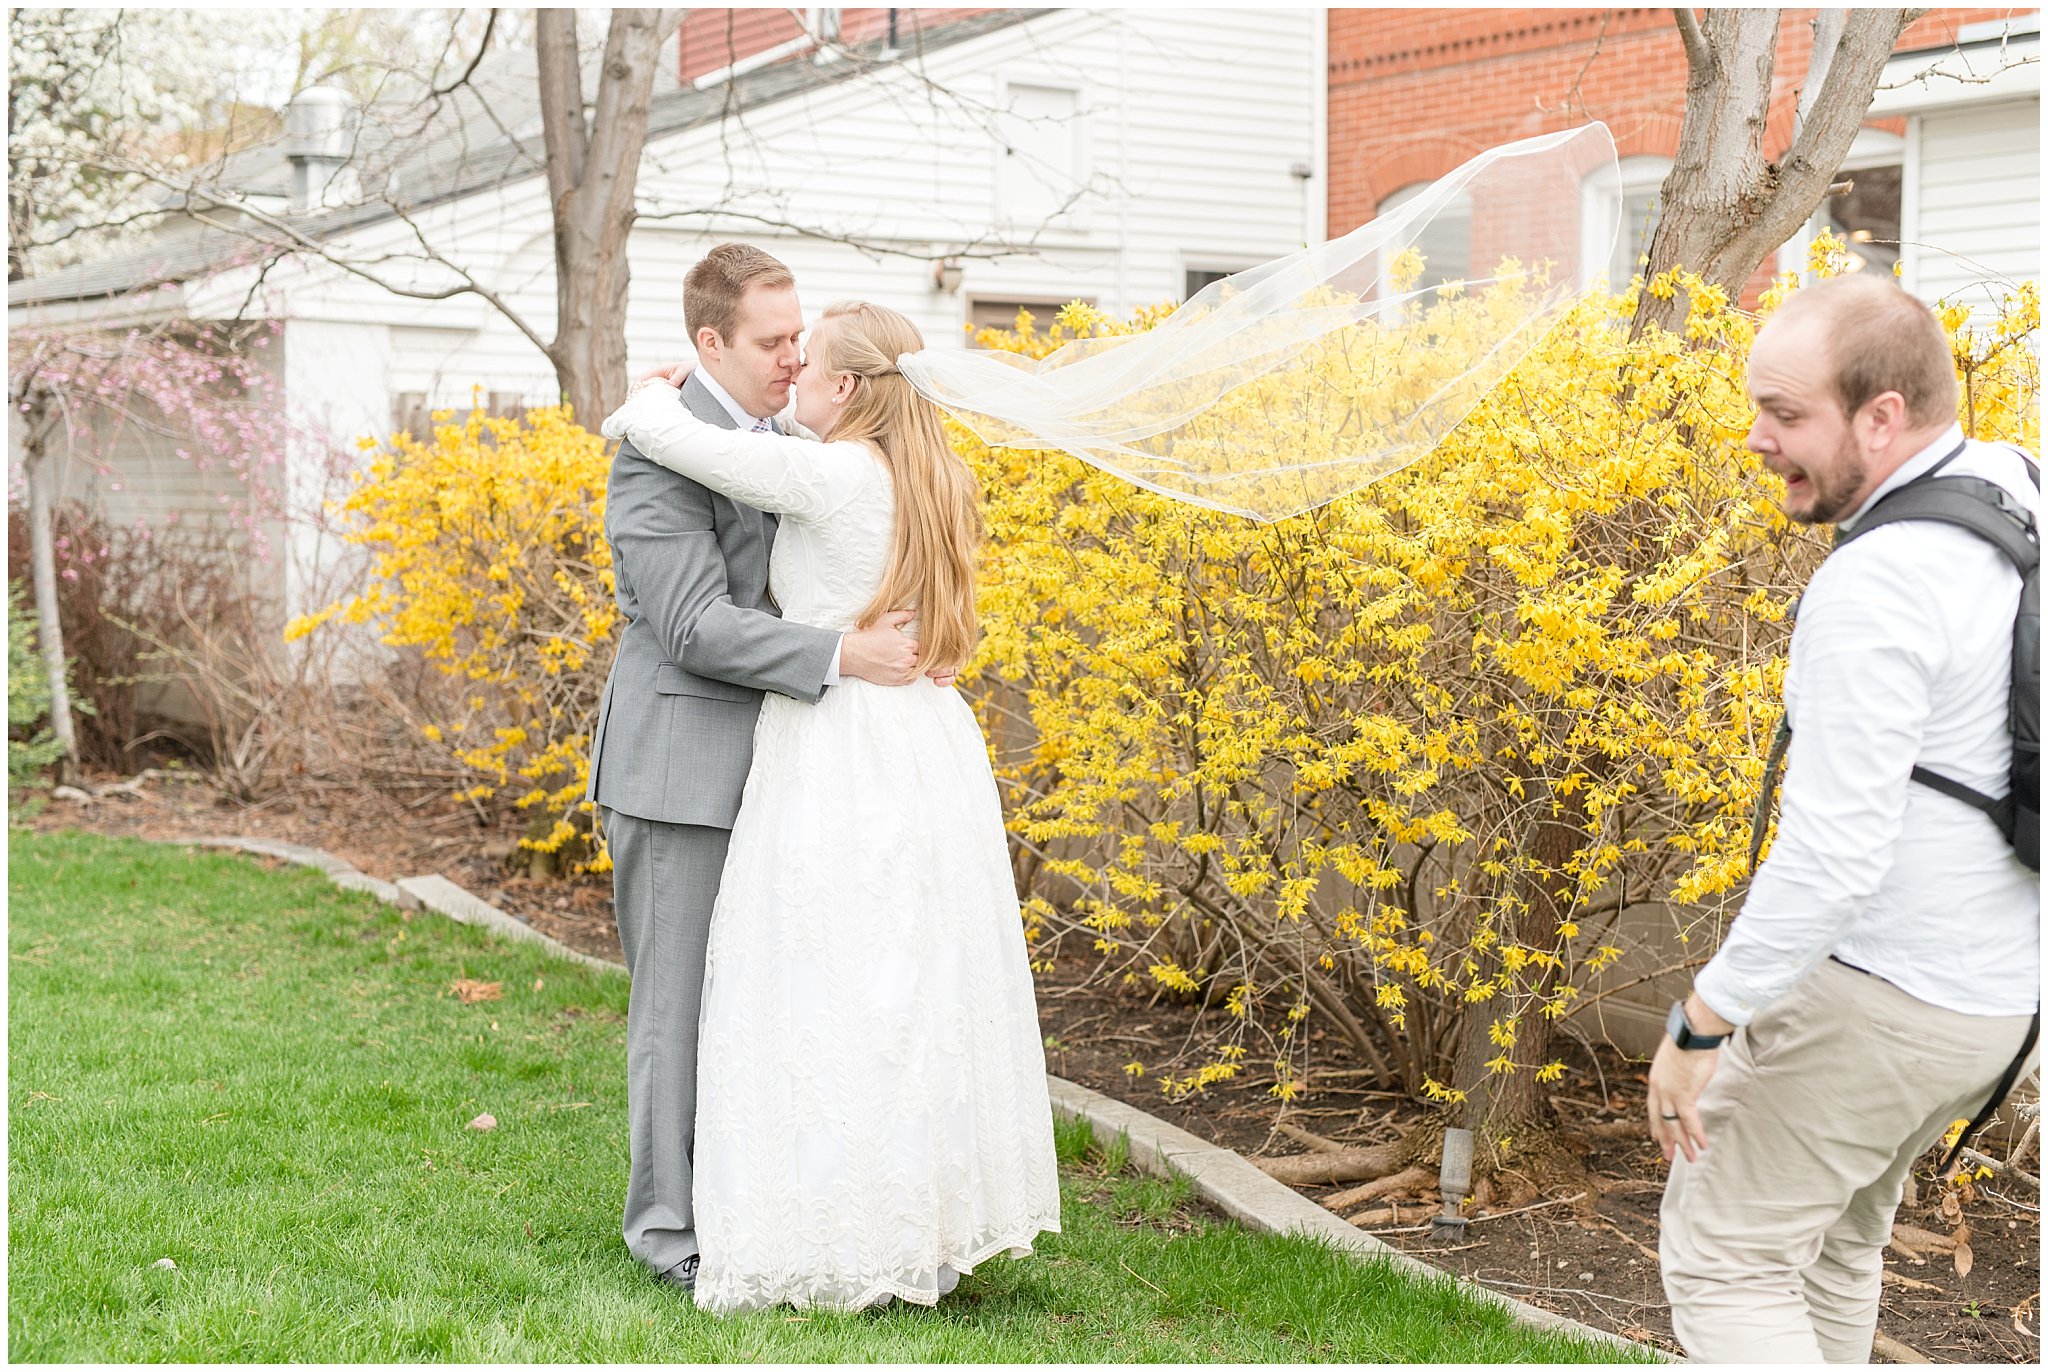 Utah Photographers at Eldredge Manor | Husband and Wife Photography Team | Jessie and Dallin Photography